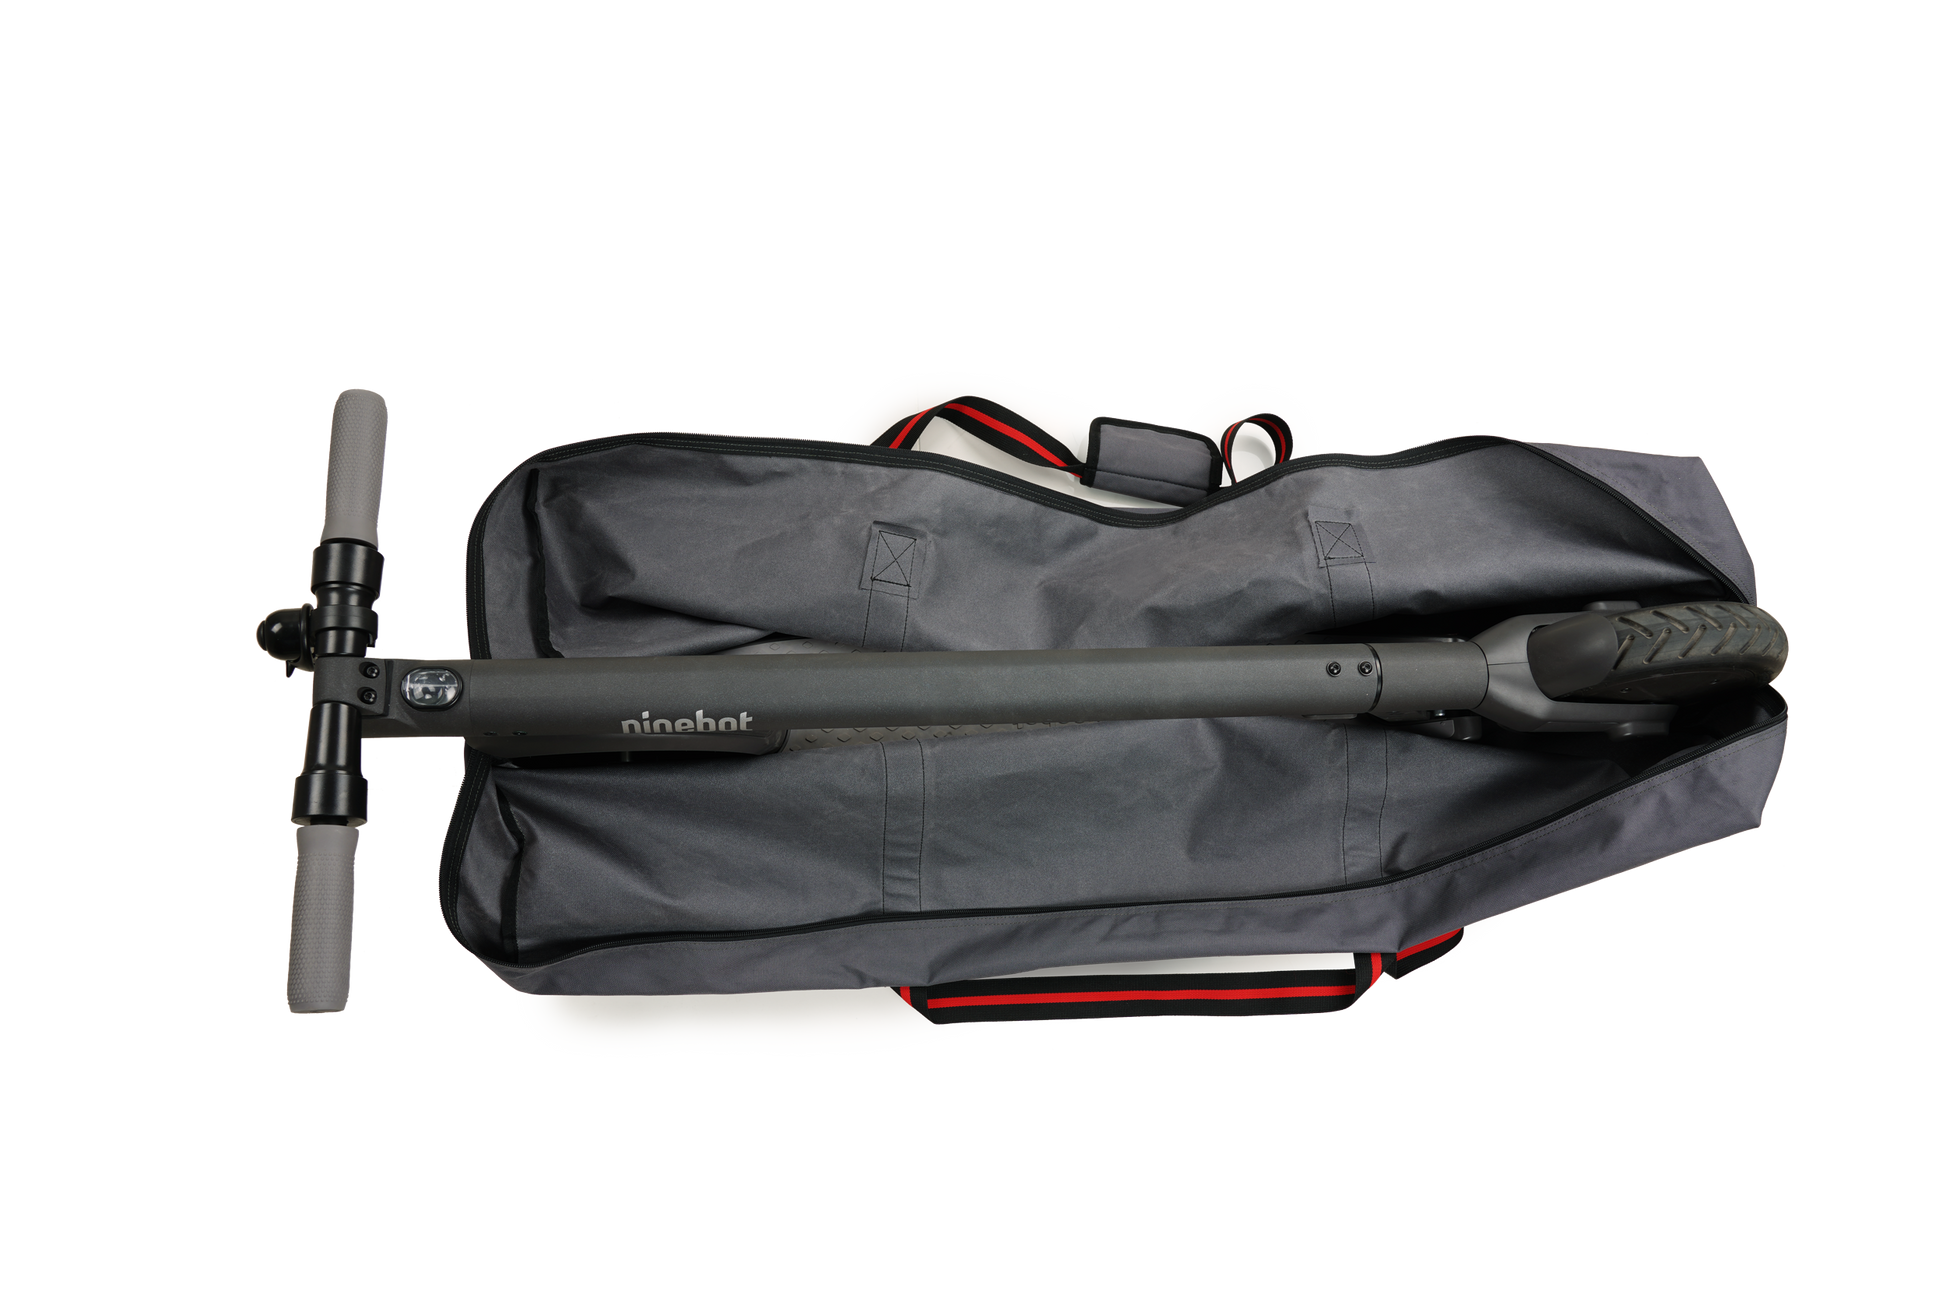 Self-Balancing Scooter with Travel Bag - Black